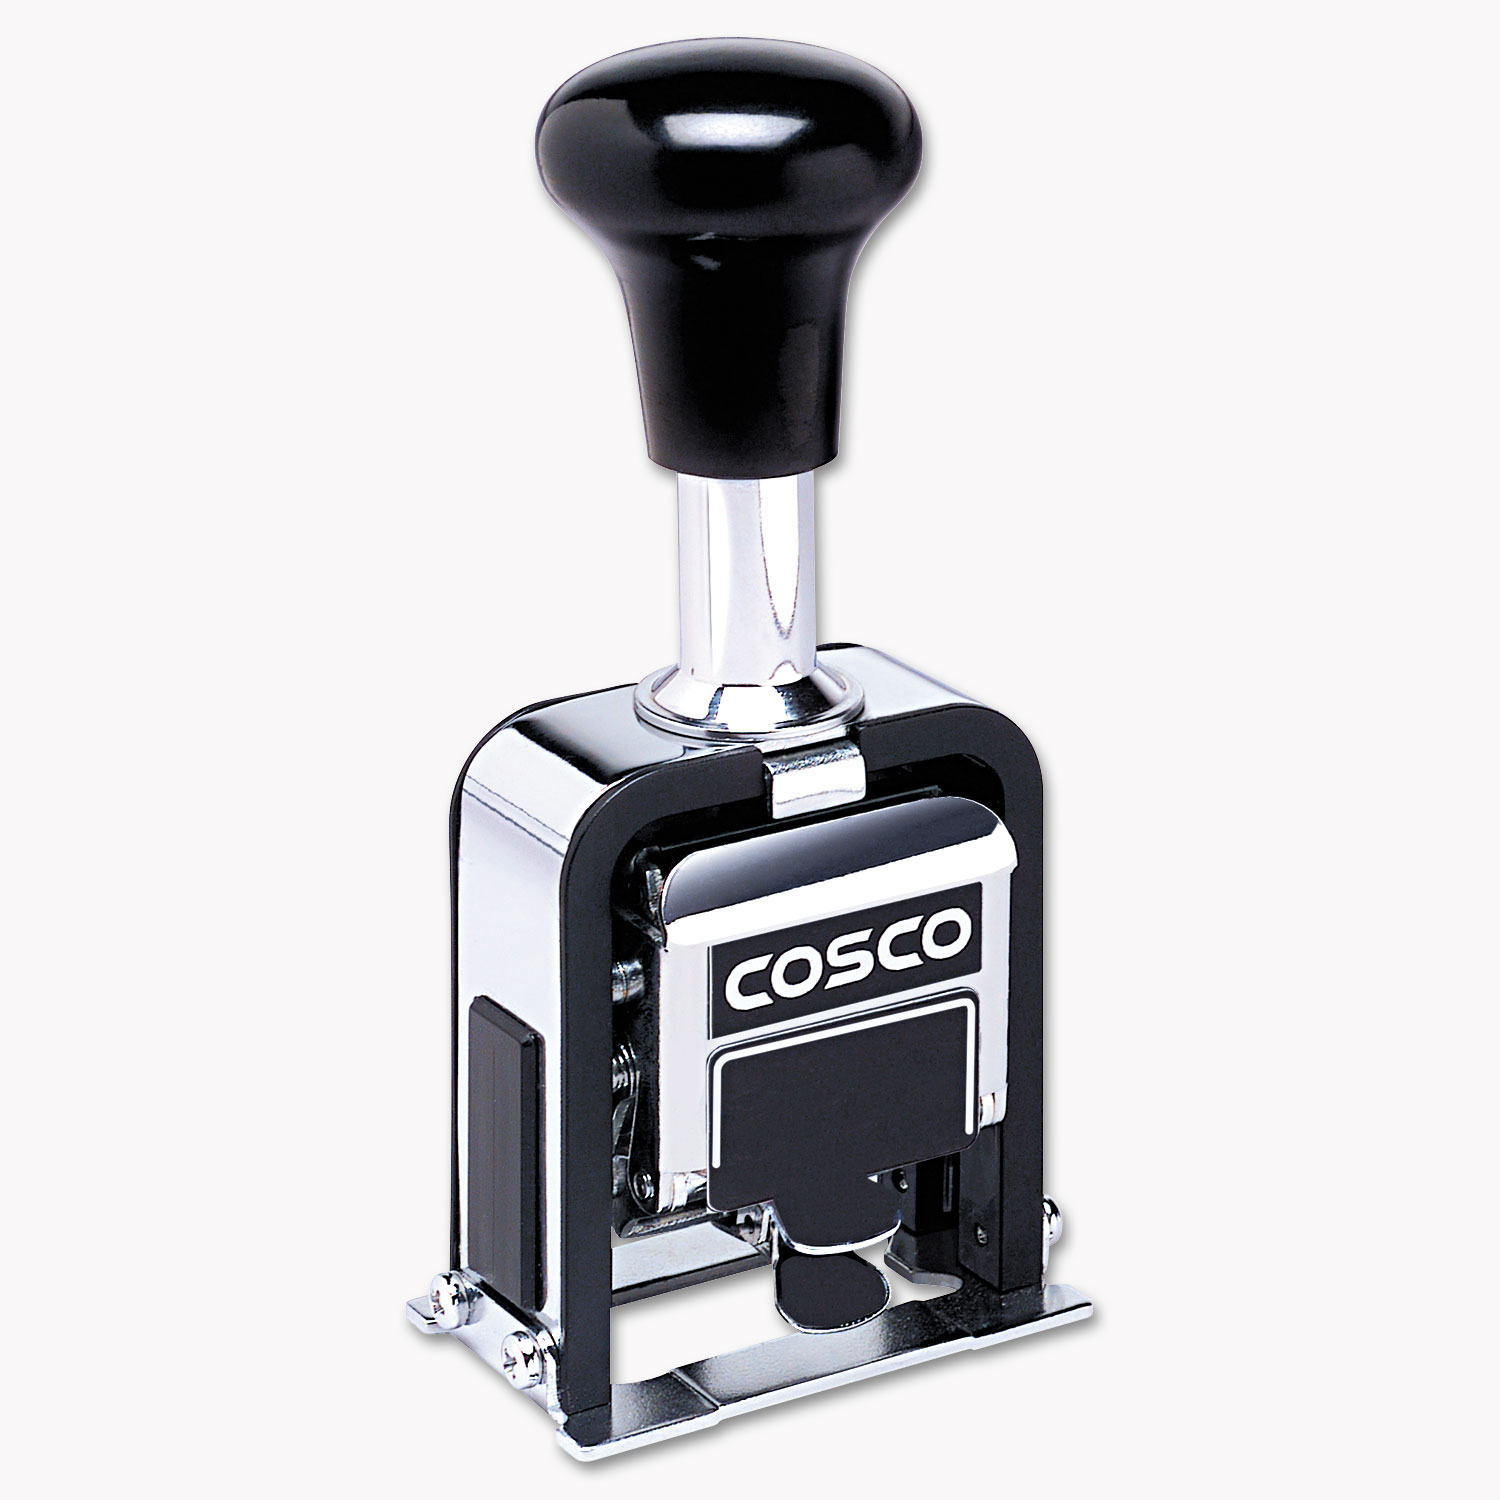  COSCO 2000PLUS 026138 Automatic Numbering Machine, 6 wheels, Self-Inking, Black 3/4 x 1/4 (COS026138) 